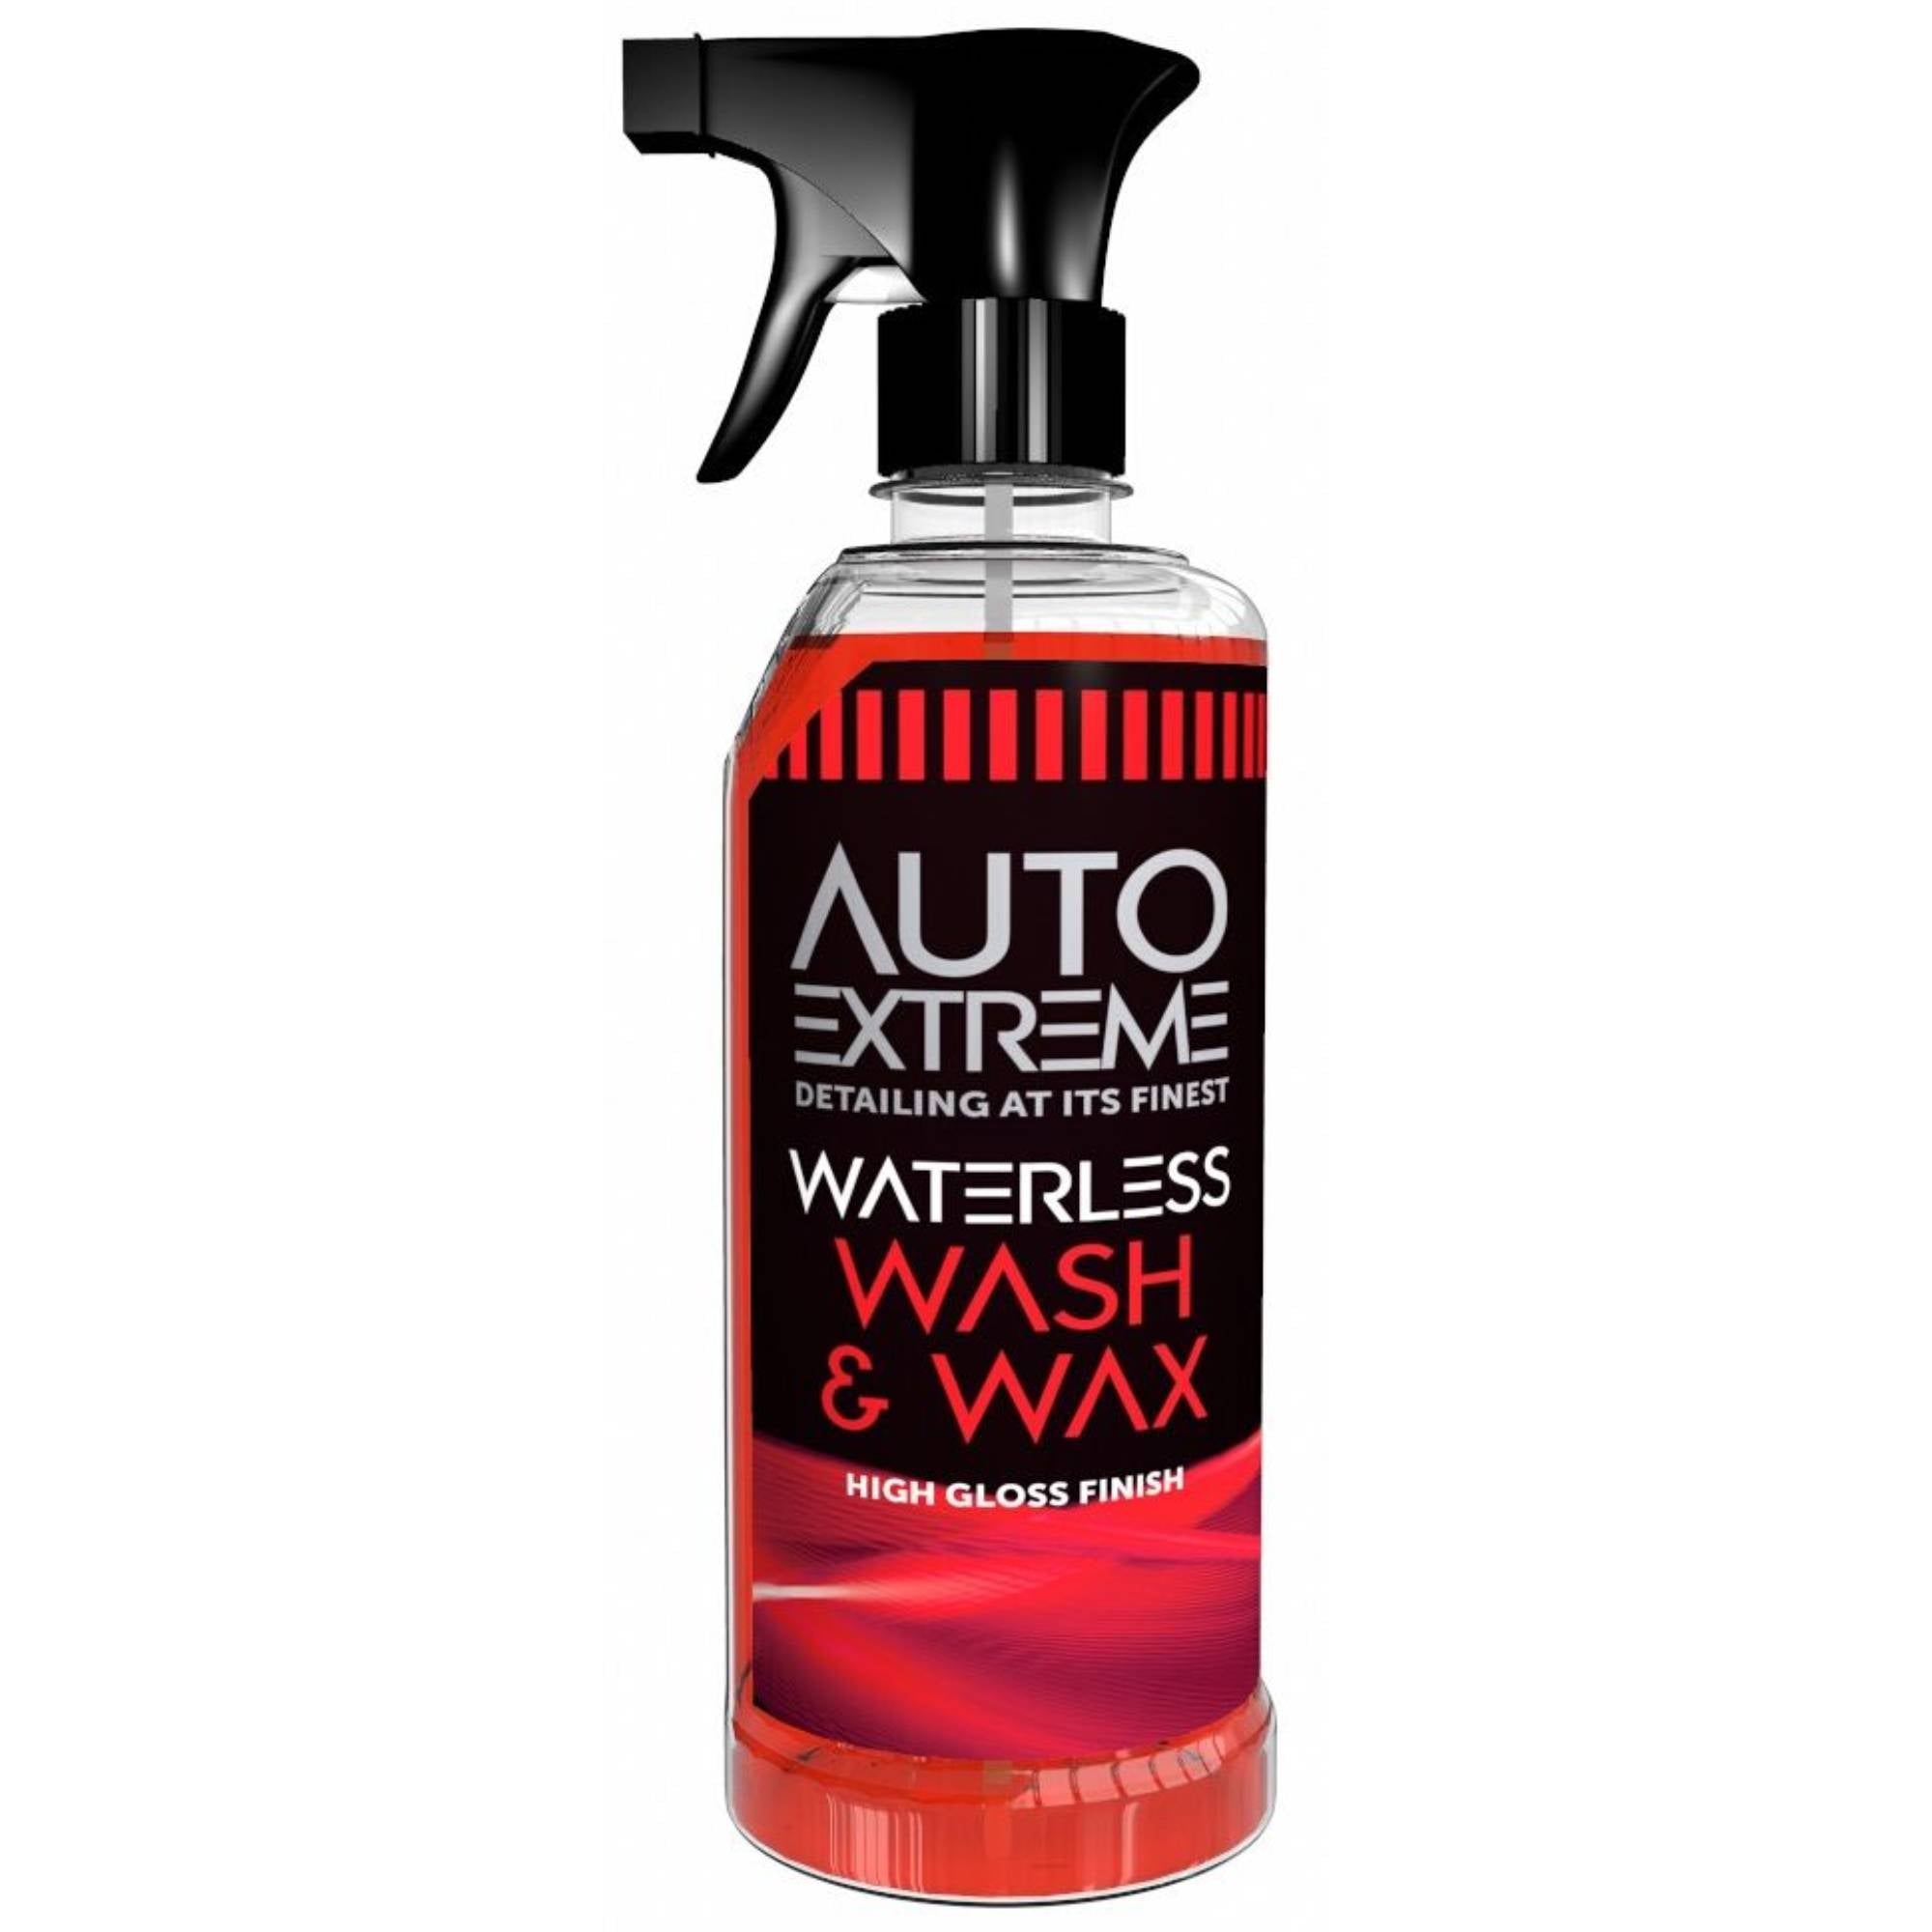 Auto Extreme Waterless Wash And Wax Trigger 720ml